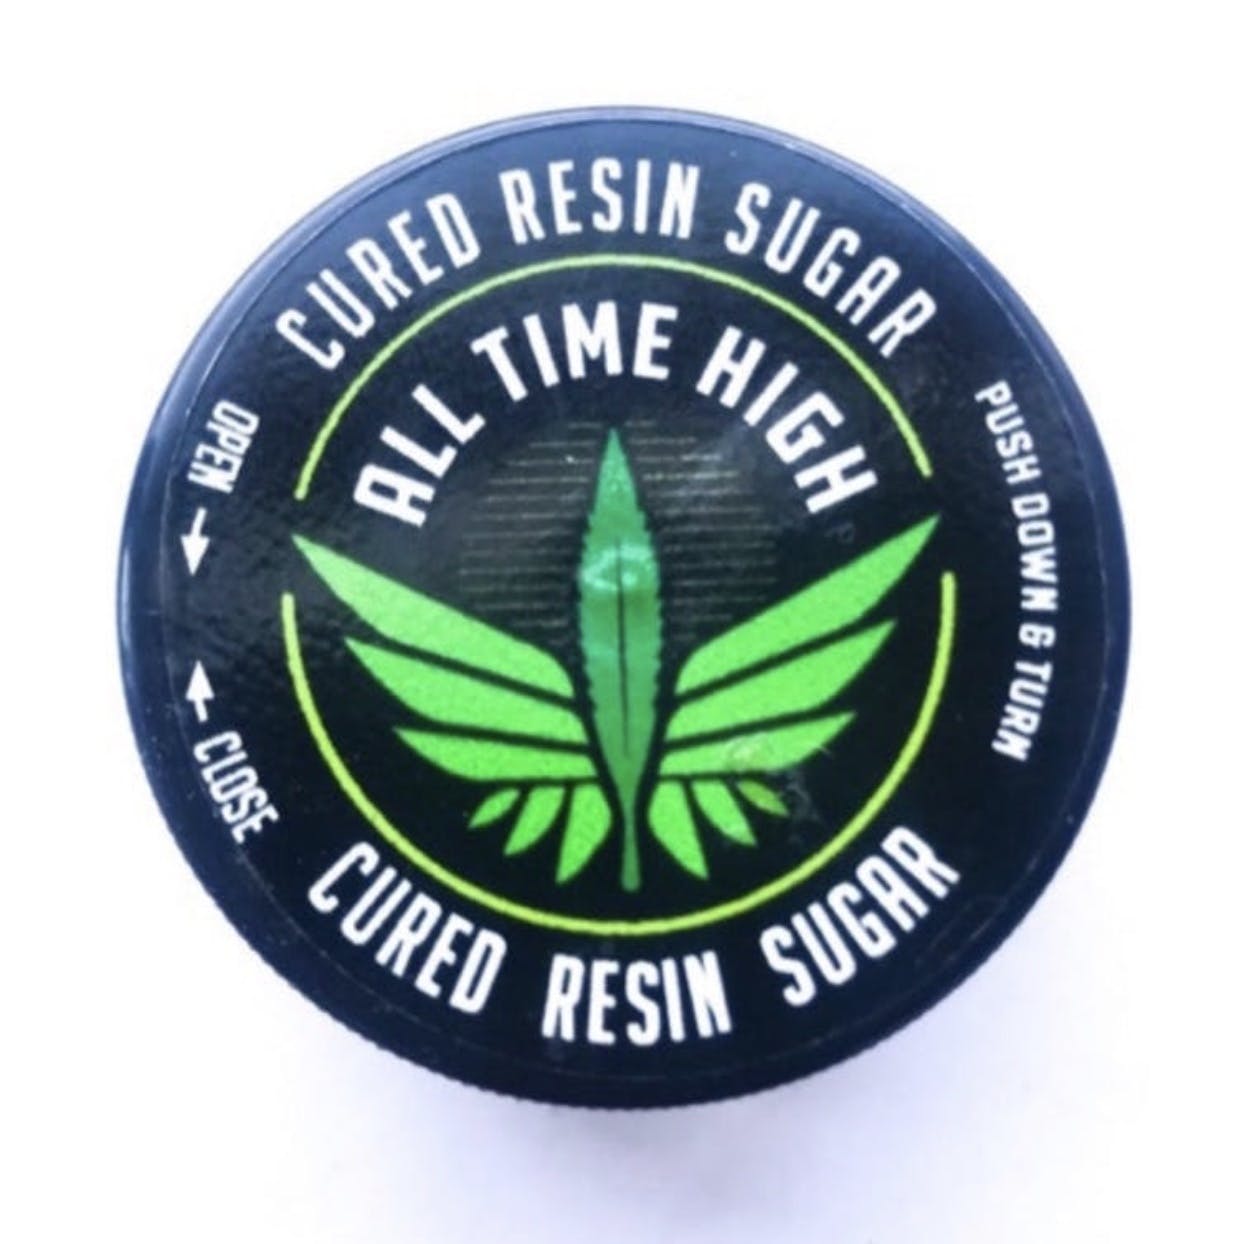 All Time High Cured Resin Sugar (5 for 160)